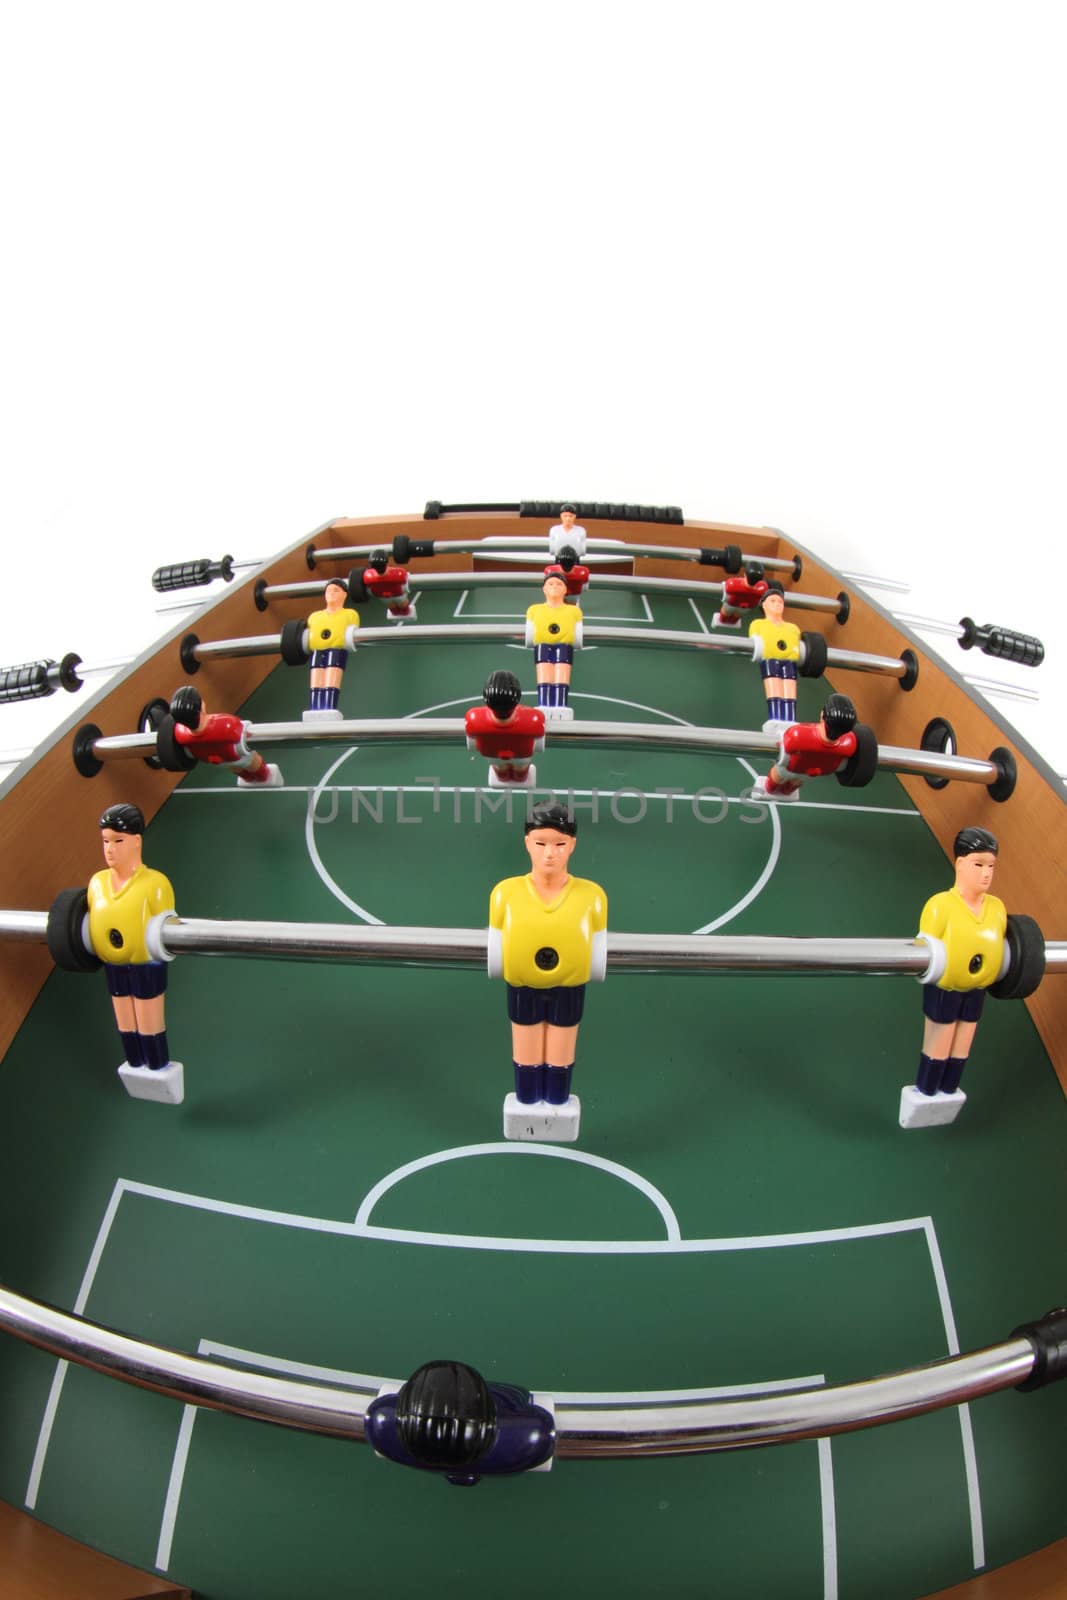 table soccer game as very nice sport background